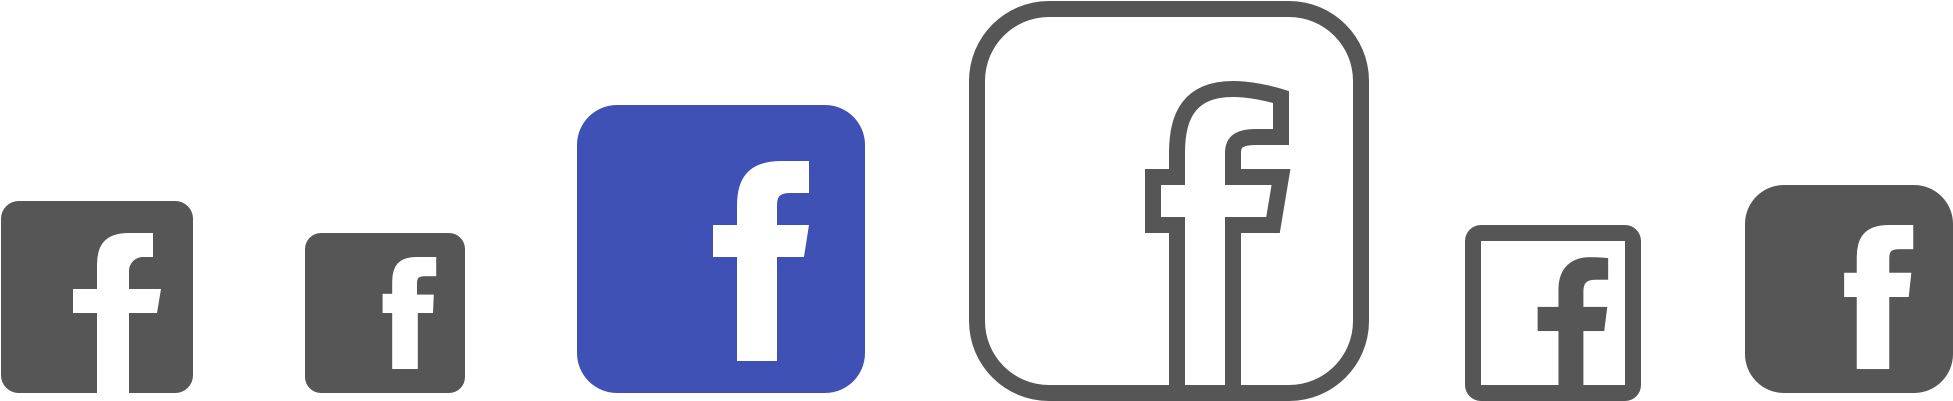 Facebook App Icons Array PNG